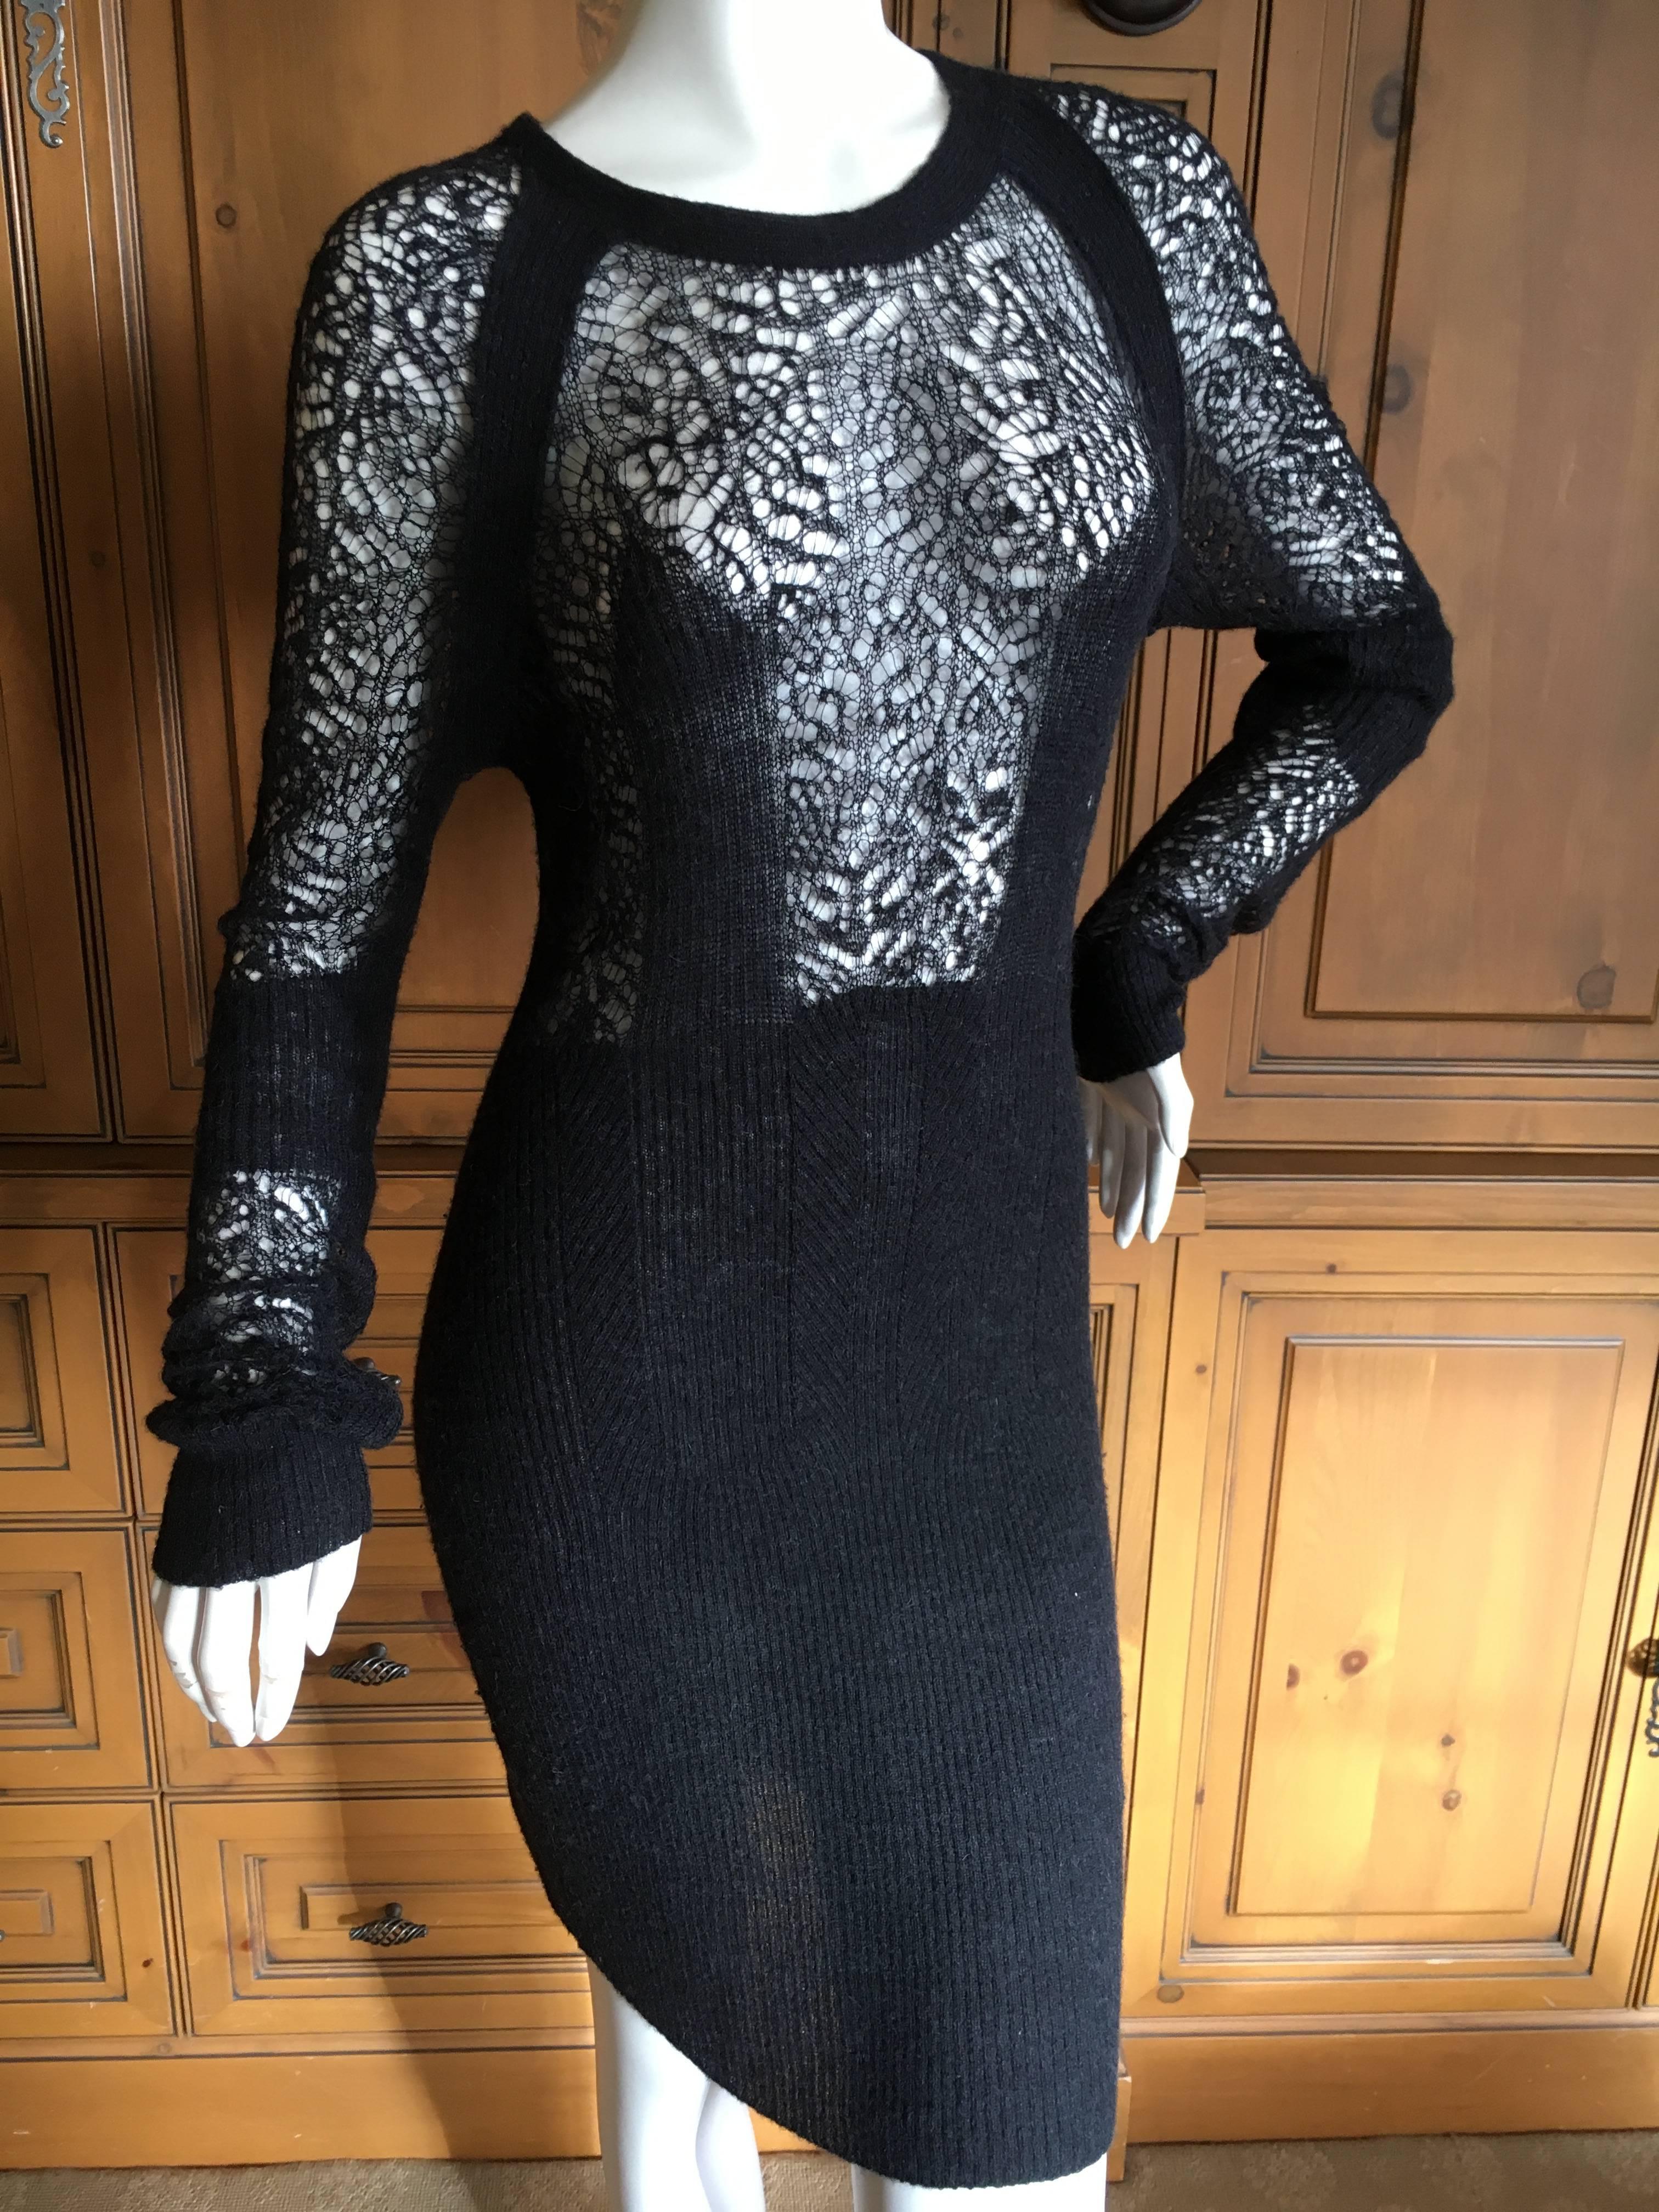 Sexy sheer knit cocktail dress from MM6 Maison Martin Margiela.
So chic.
Detail s to follow
Will fit size 4-6